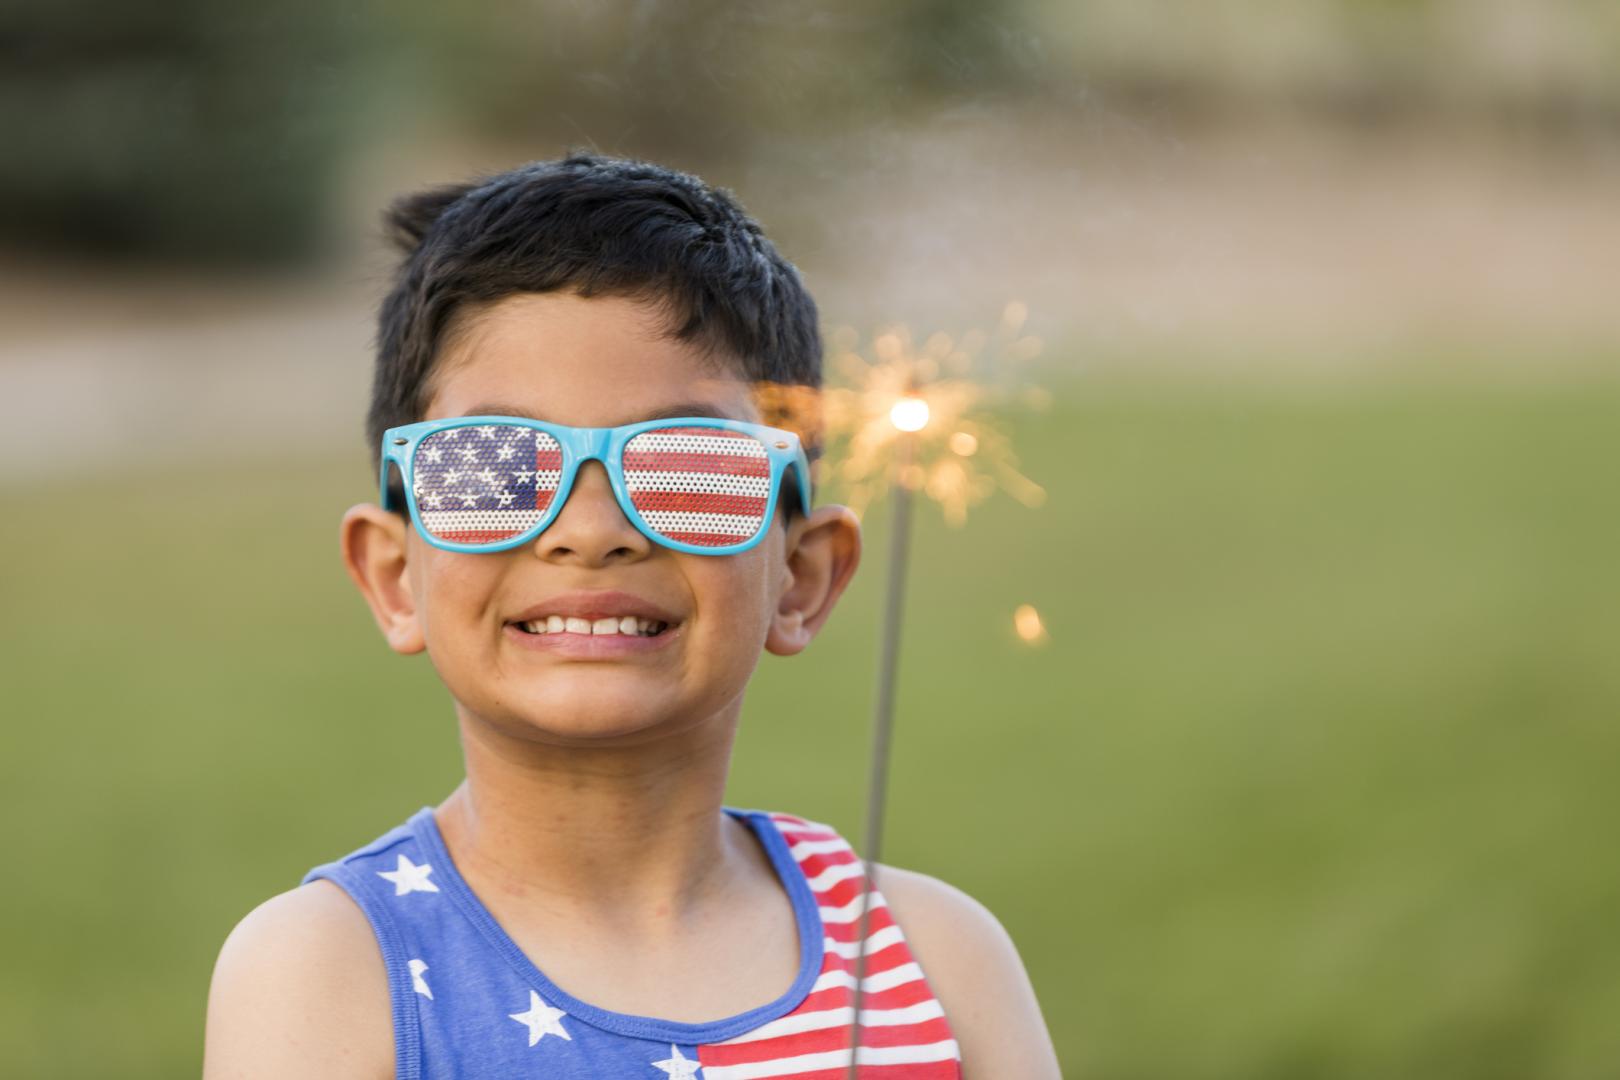 Child with sparkler and USA glasses